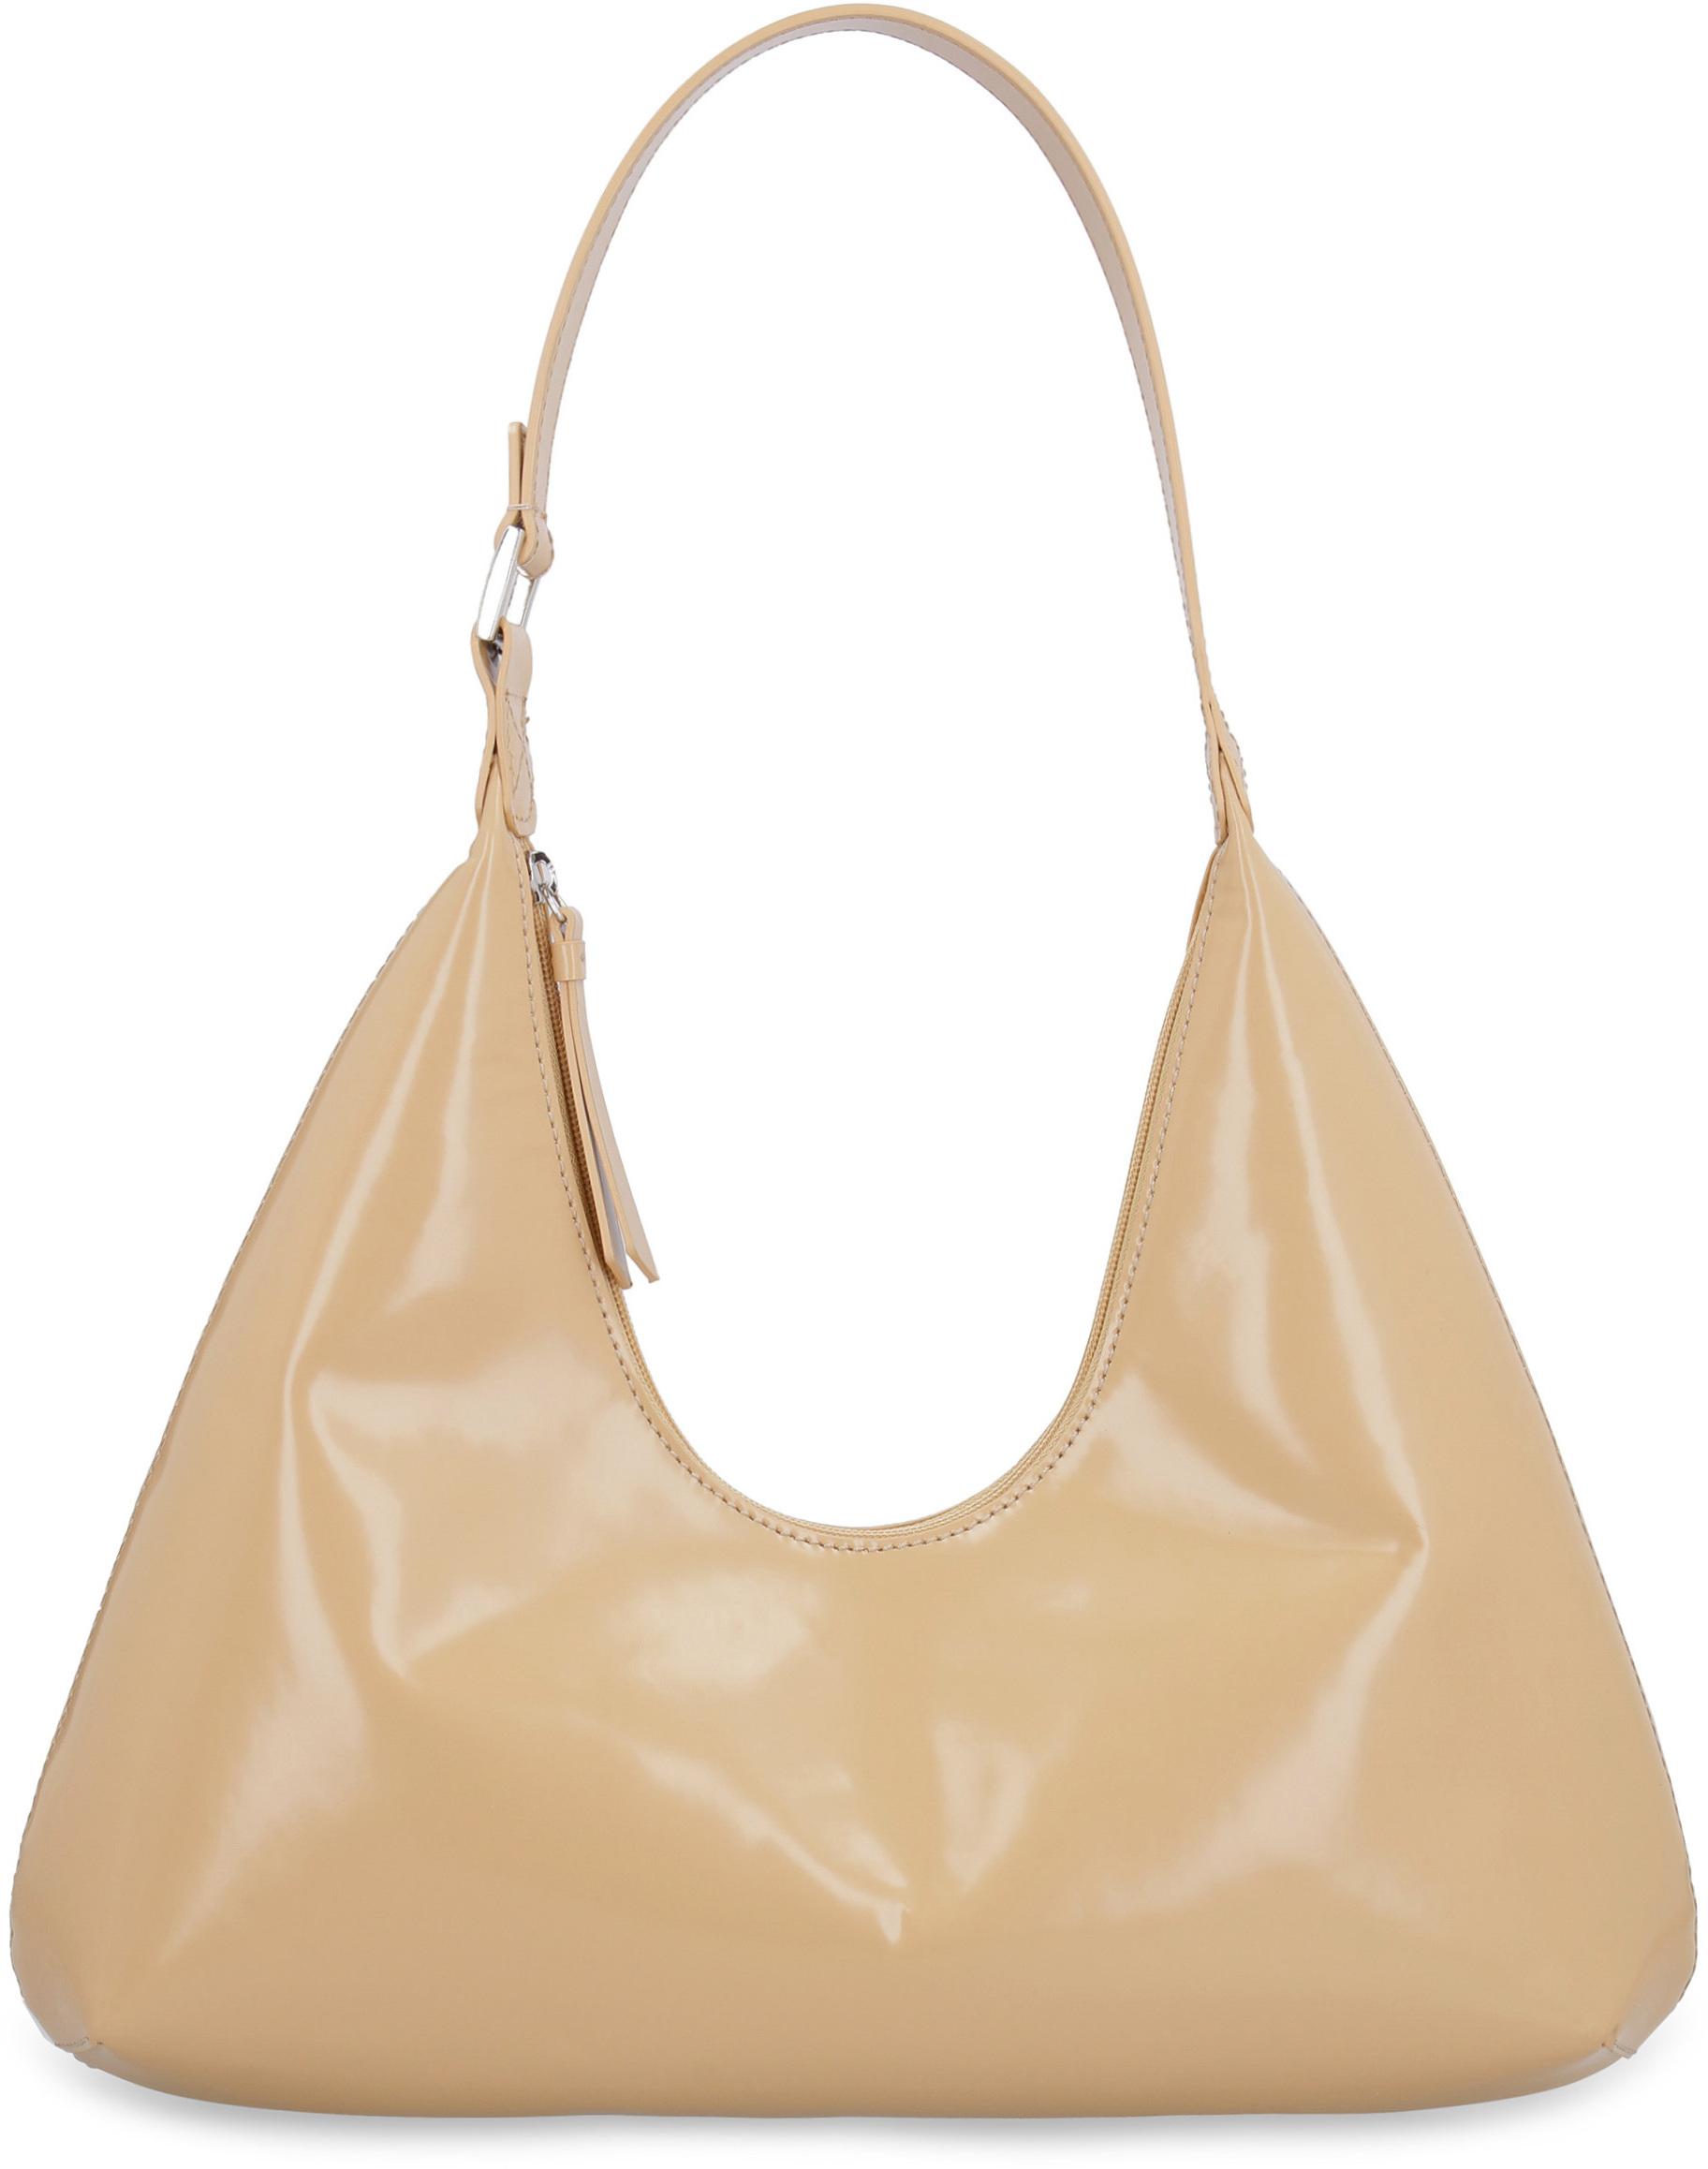 BY FAR Patent Leather Amber Shoulder Bag in Beige (White) - Save 